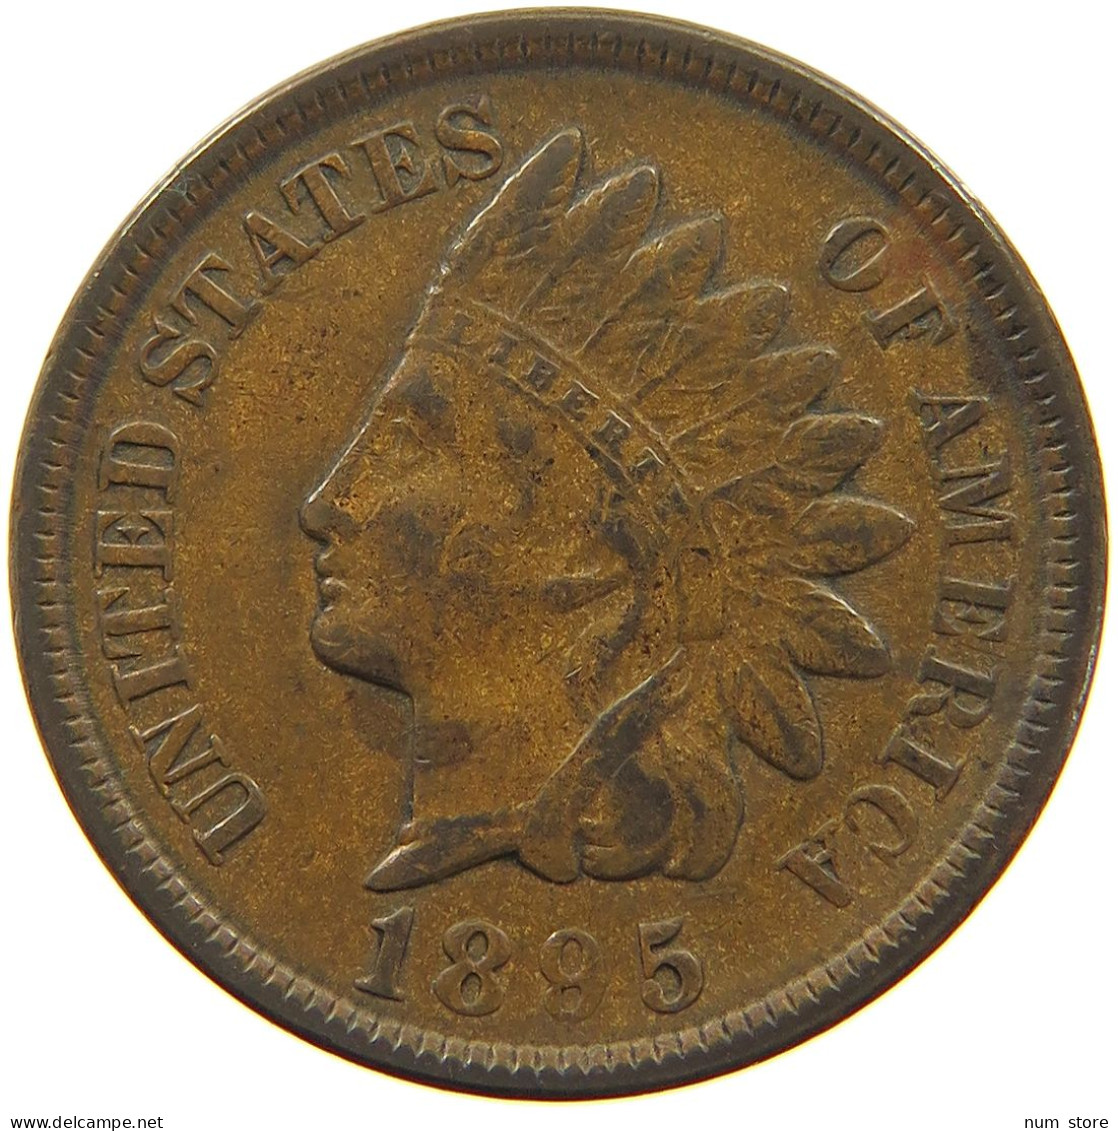 UNITED STATES OF AMERICA CENT 1895 INDIAN HEAD #t140 0351 - 1859-1909: Indian Head